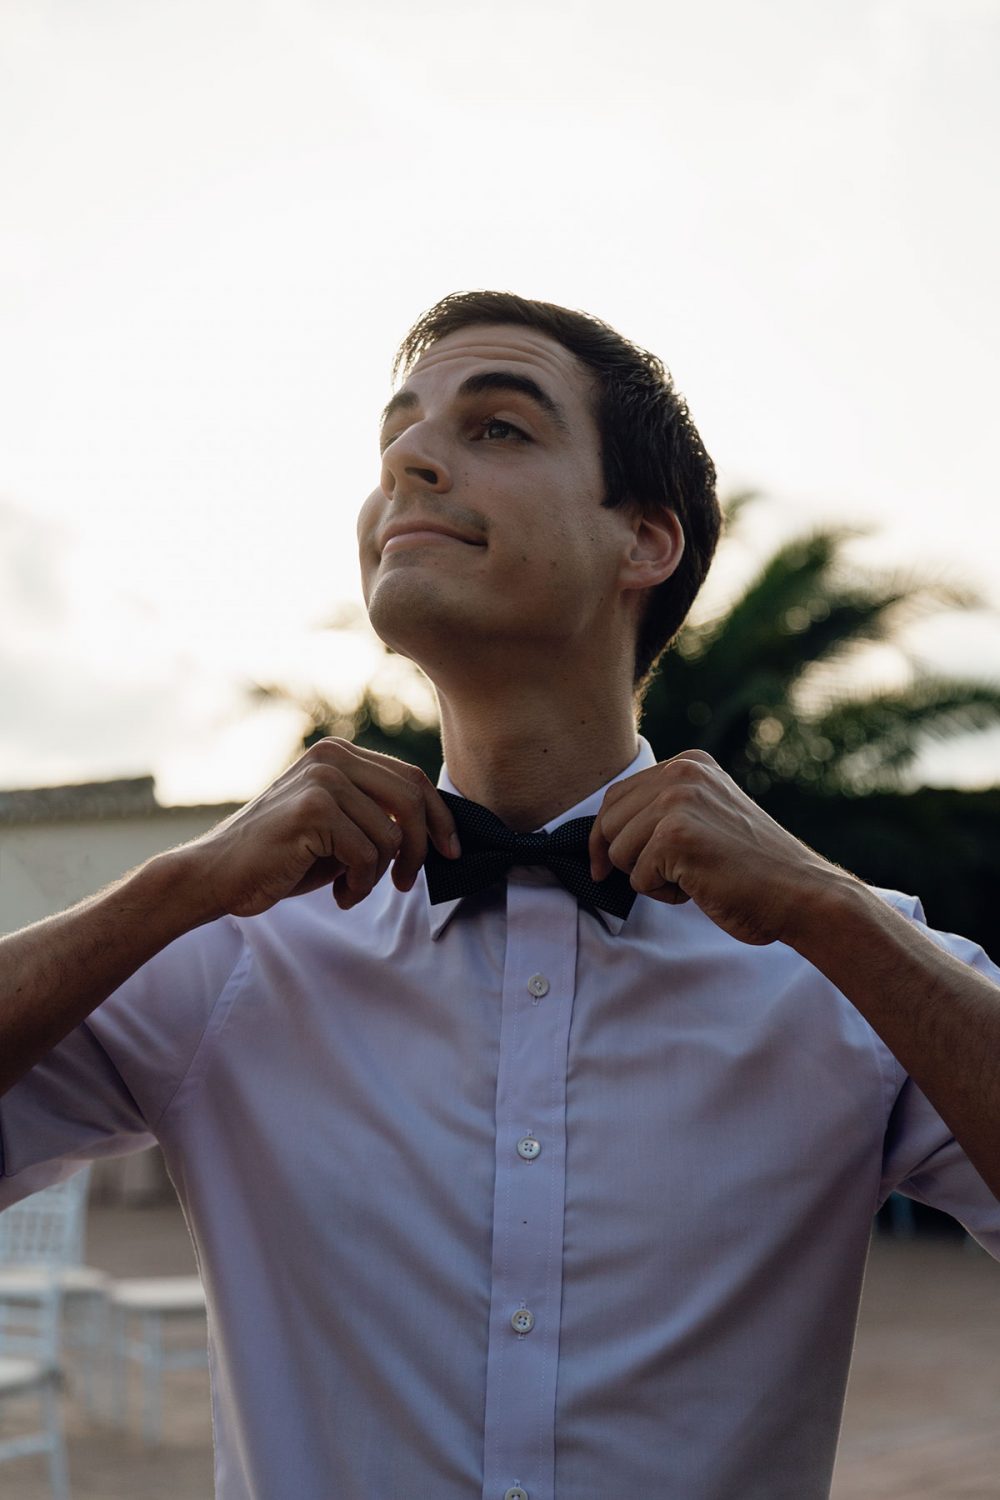 funny portrait of a wedding guest with a bow tie